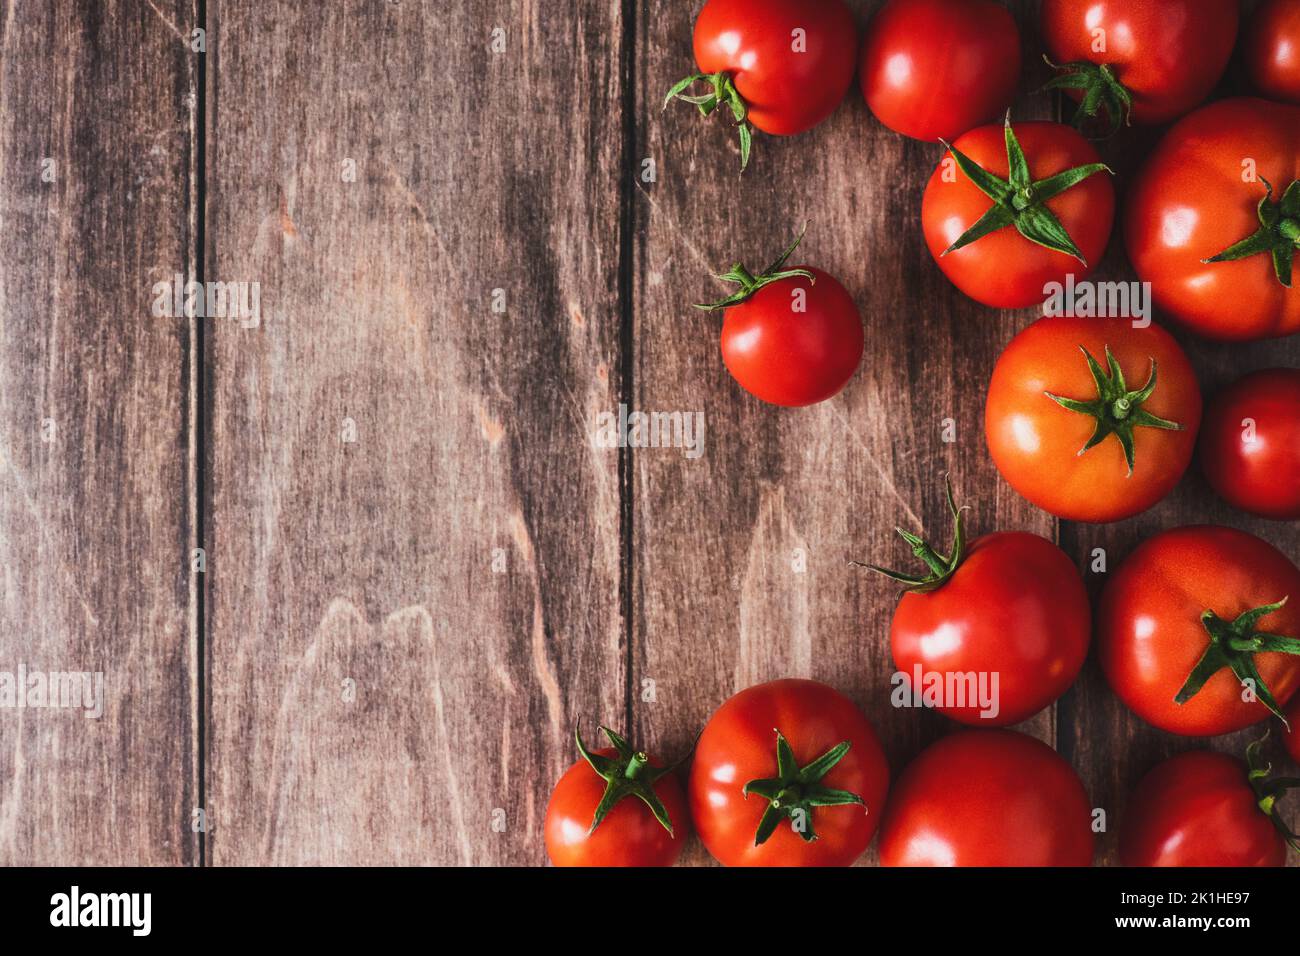 Tomatoes on old wooden table, fresh red tomato vegetables flat lay with copy space Stock Photo